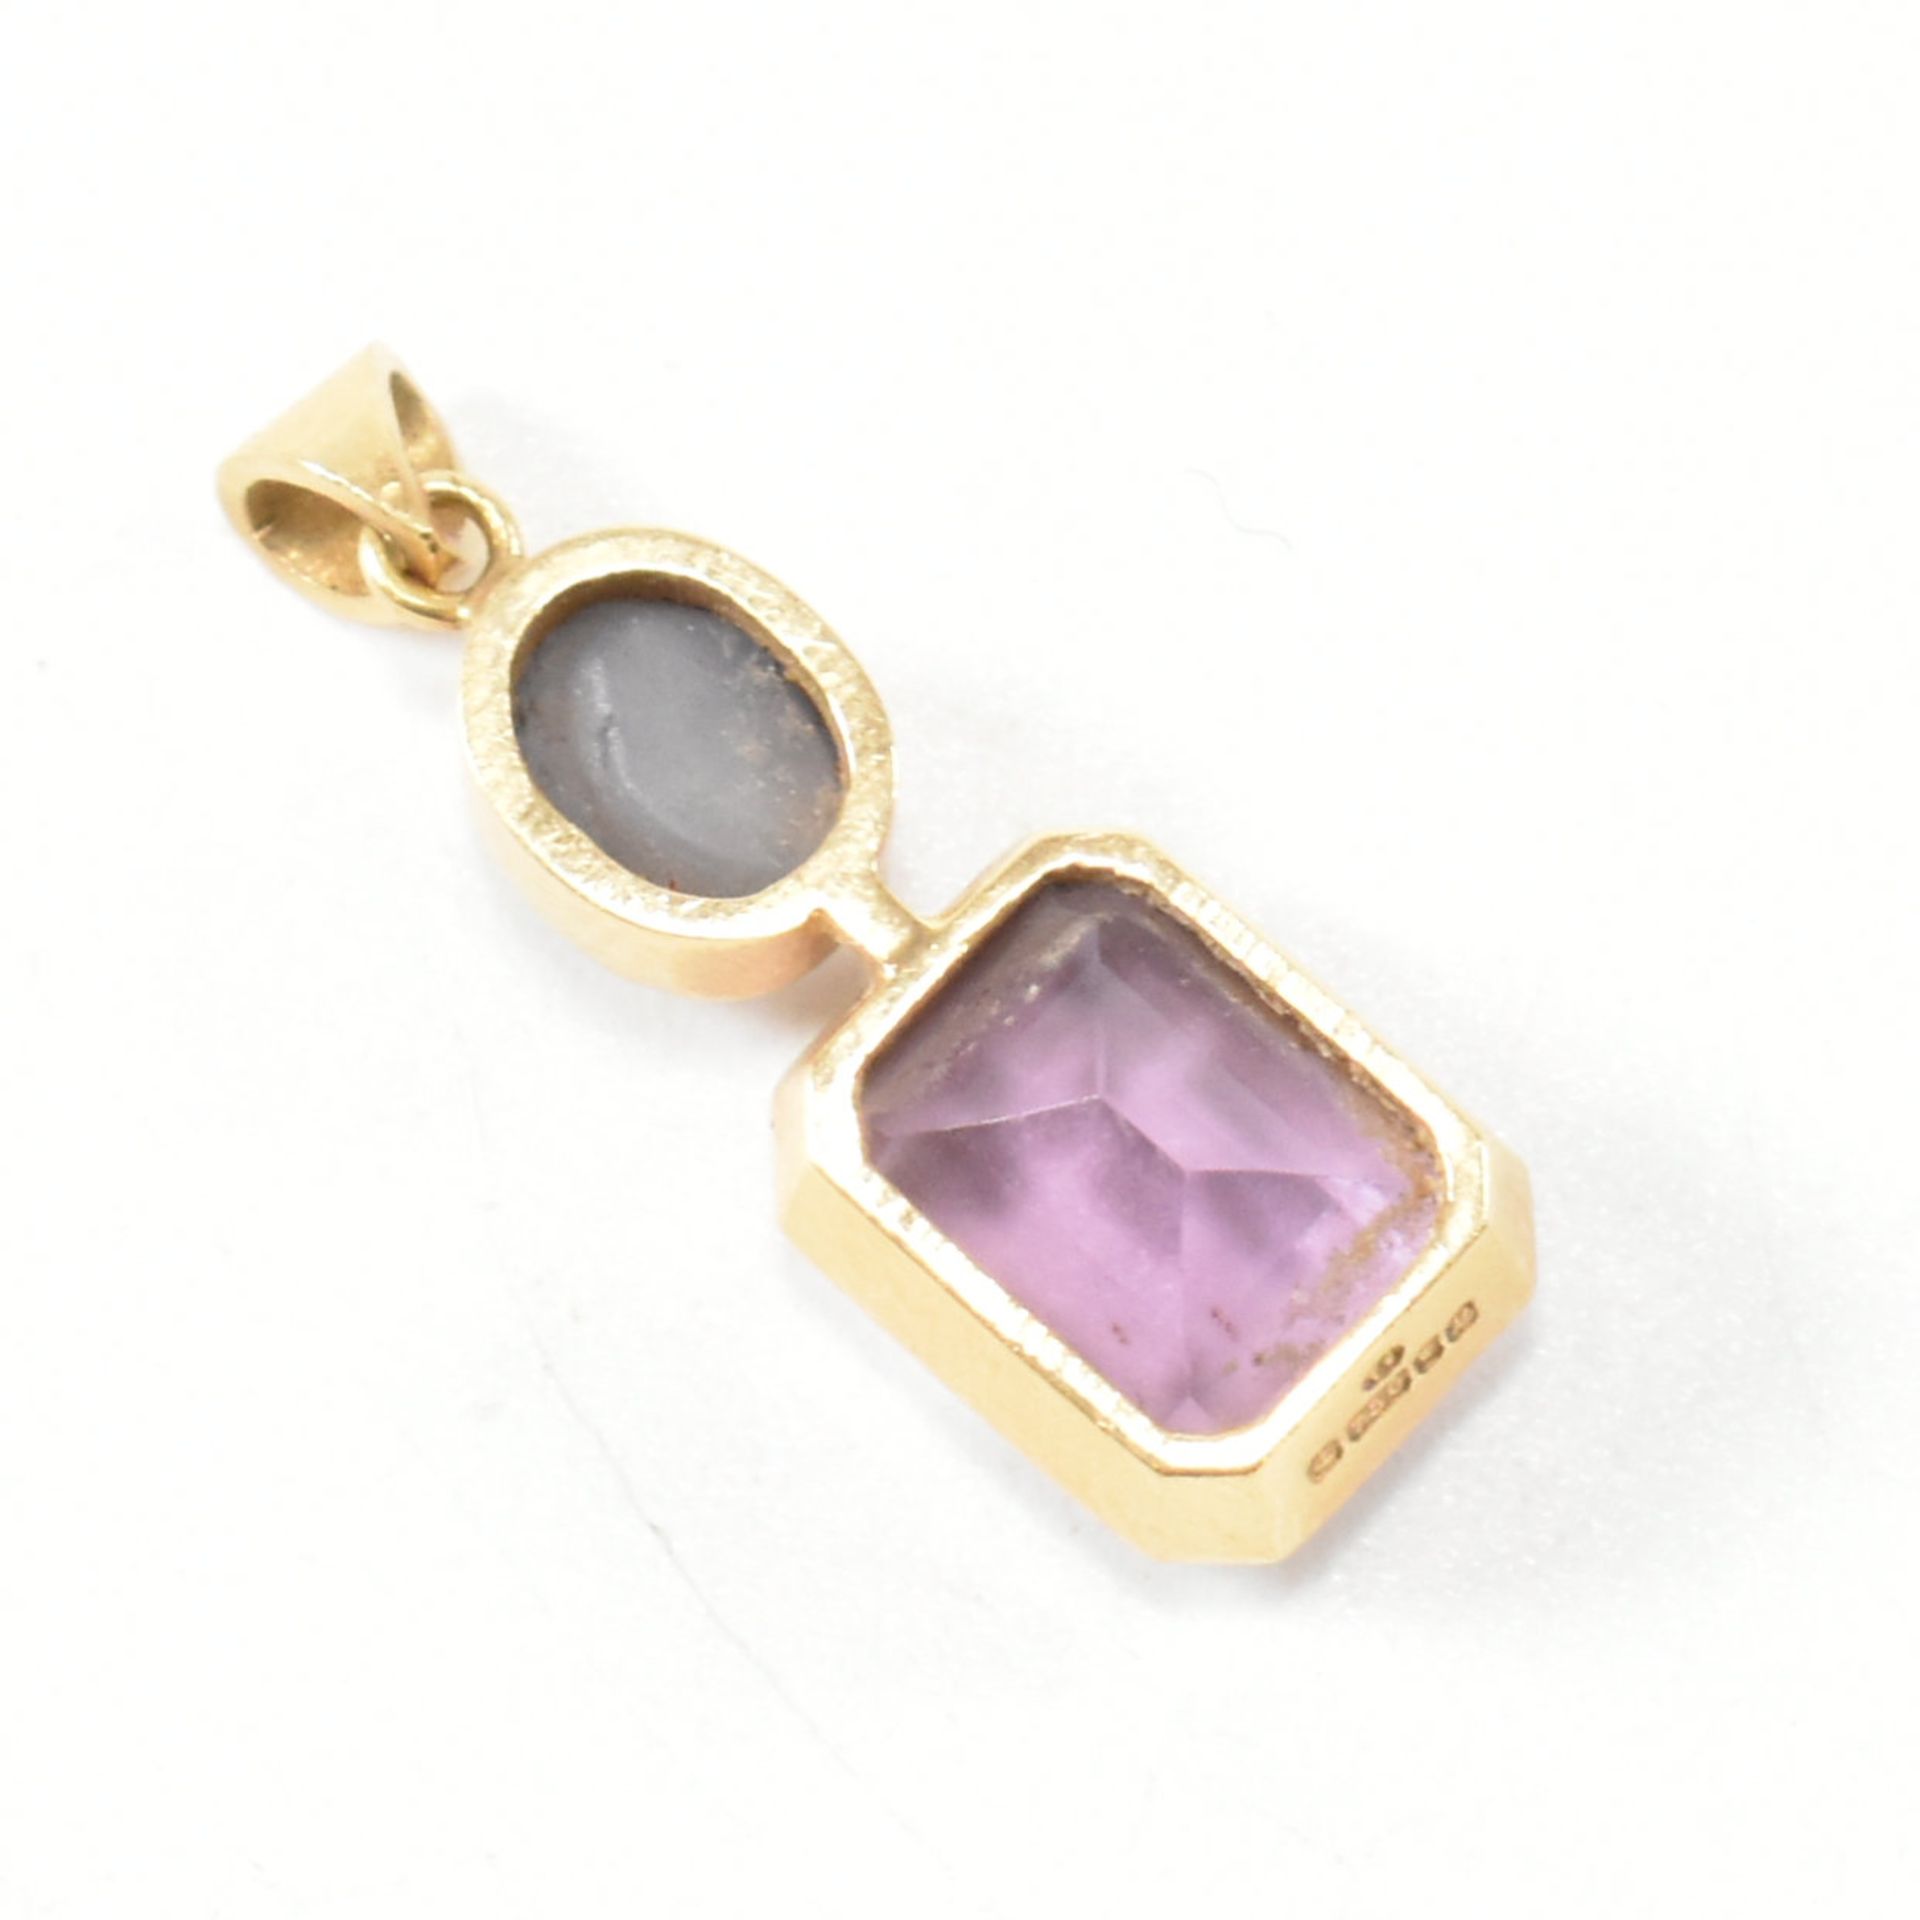 HALLMARKED 18CT GOLD AMETHYST & STAR SAPPHIRE NECKLACE PENDANT - Image 2 of 4